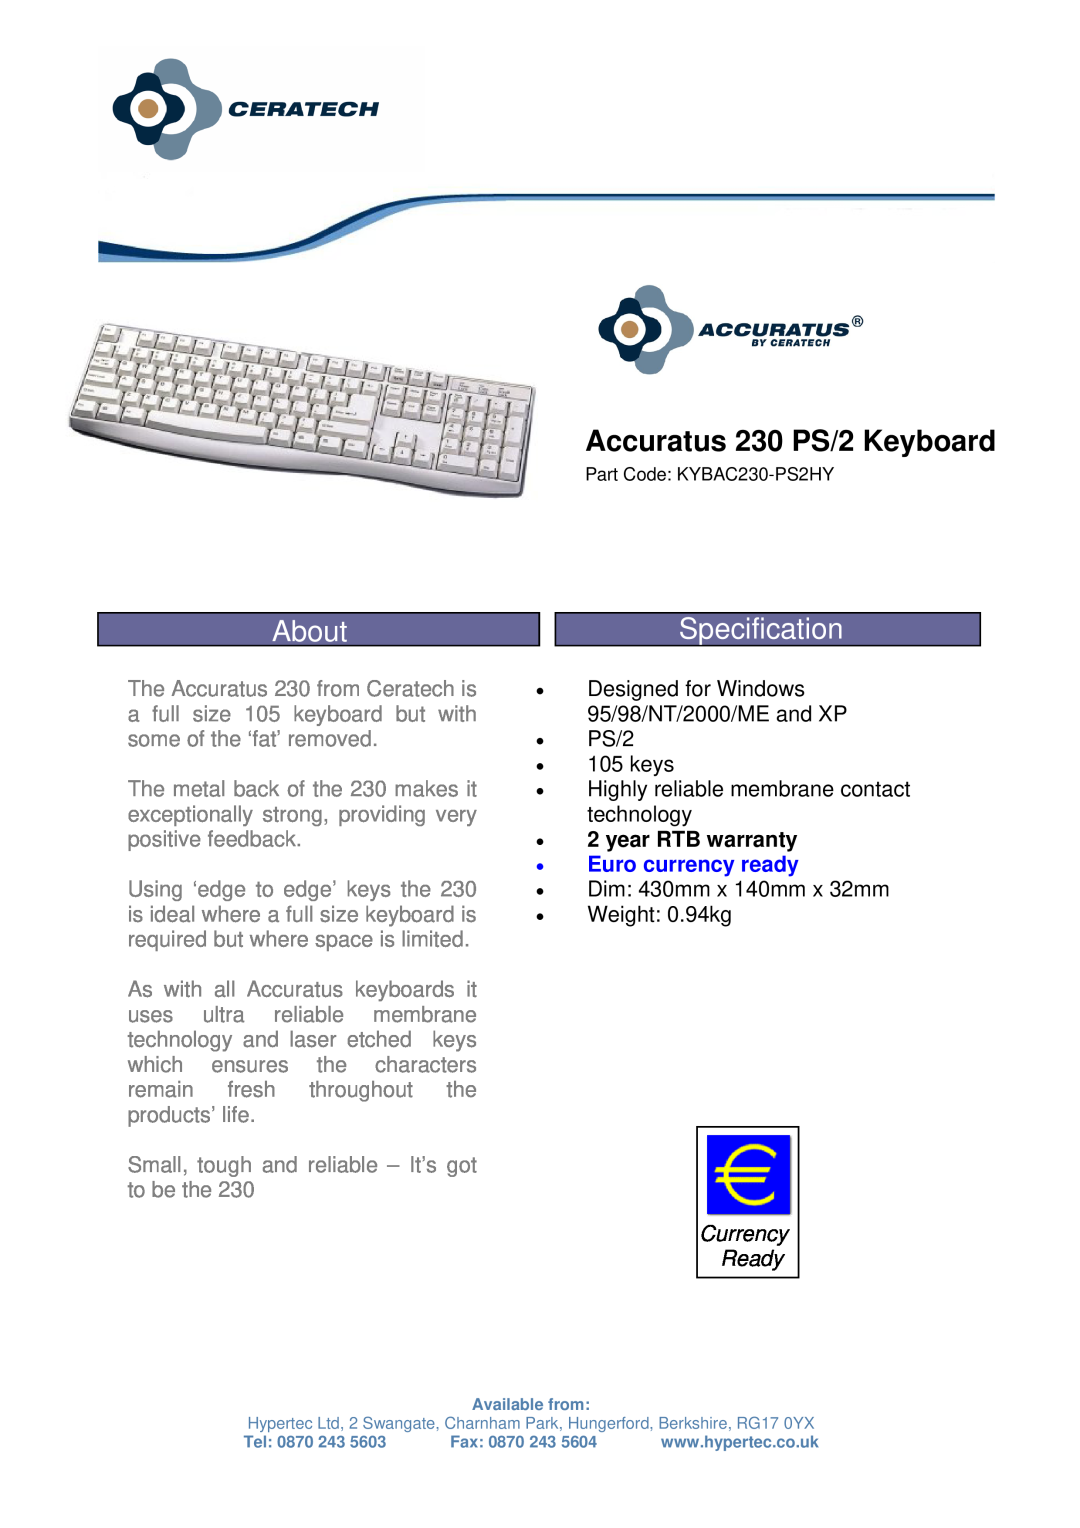 Hypertec warranty About, Accuratus 230 PS/2 Keyboard, Specification, year RTB warranty, Euro currency ready 